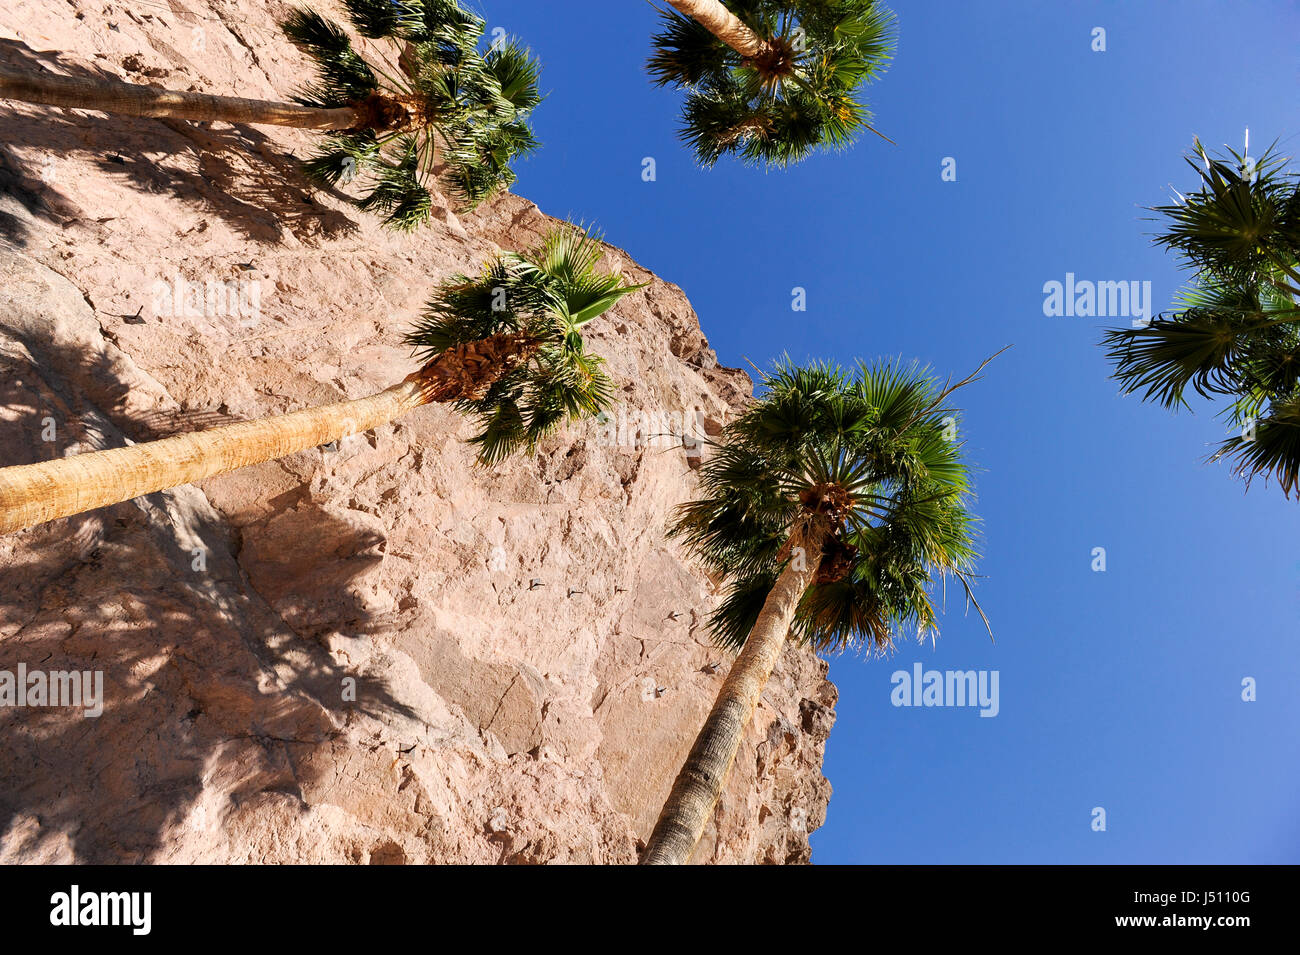 Desert palm trees and cliff side, looking upward Stock Photo